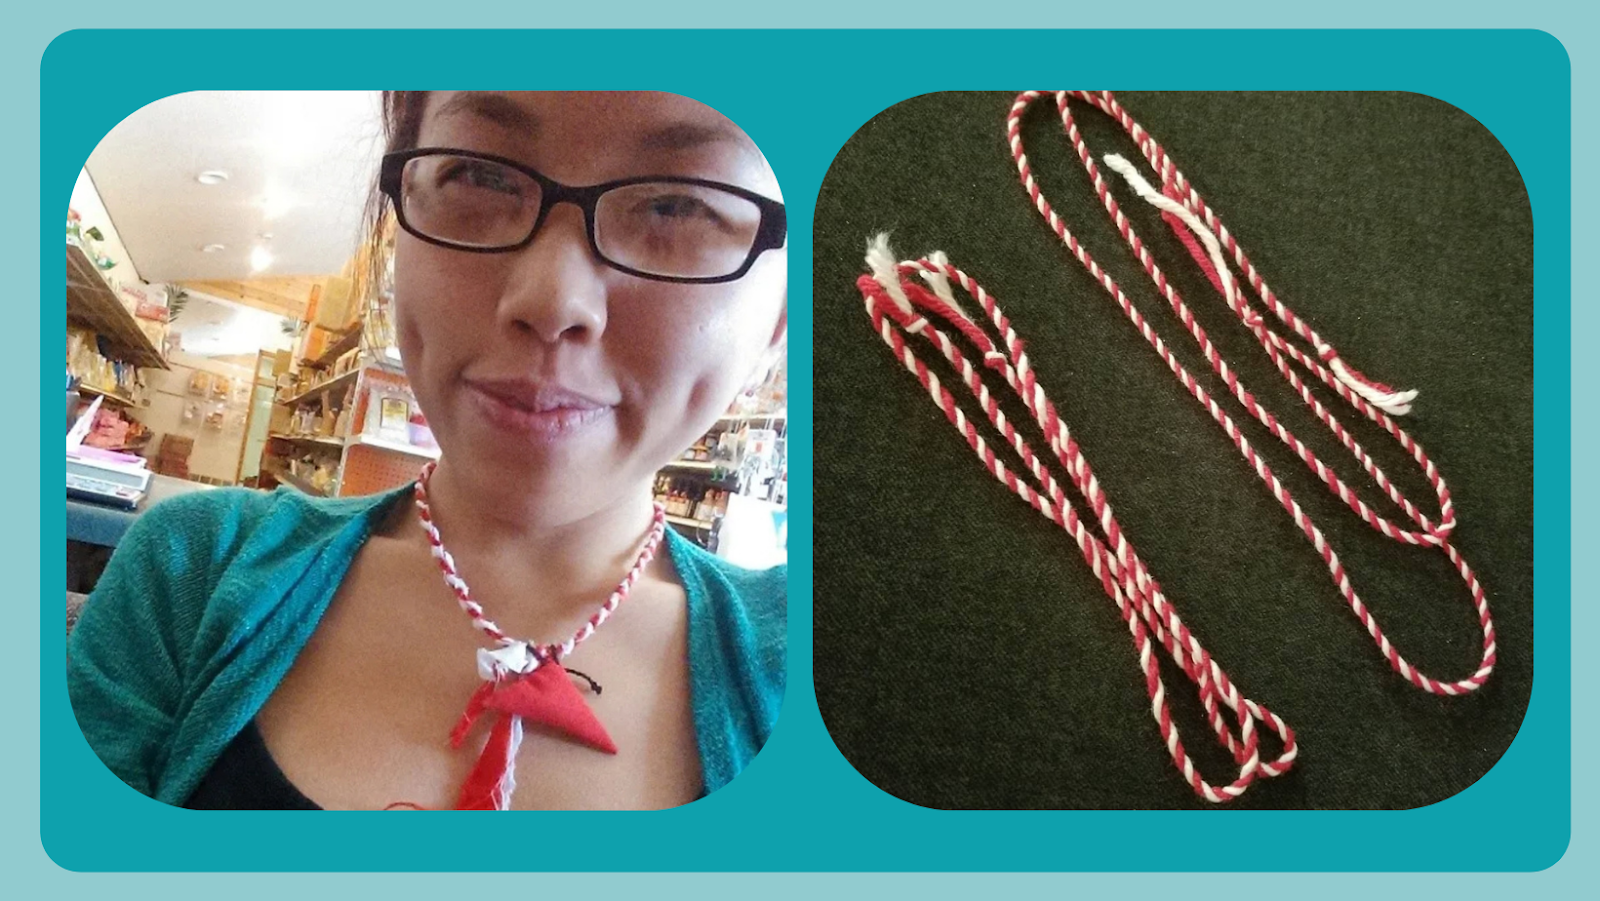 Photo on the right is of two red and white strings that Nancy made to tie on people for protection. Photo on the left is of Nancy wearing a red and white string around their neck that someone tied onto them for protection.